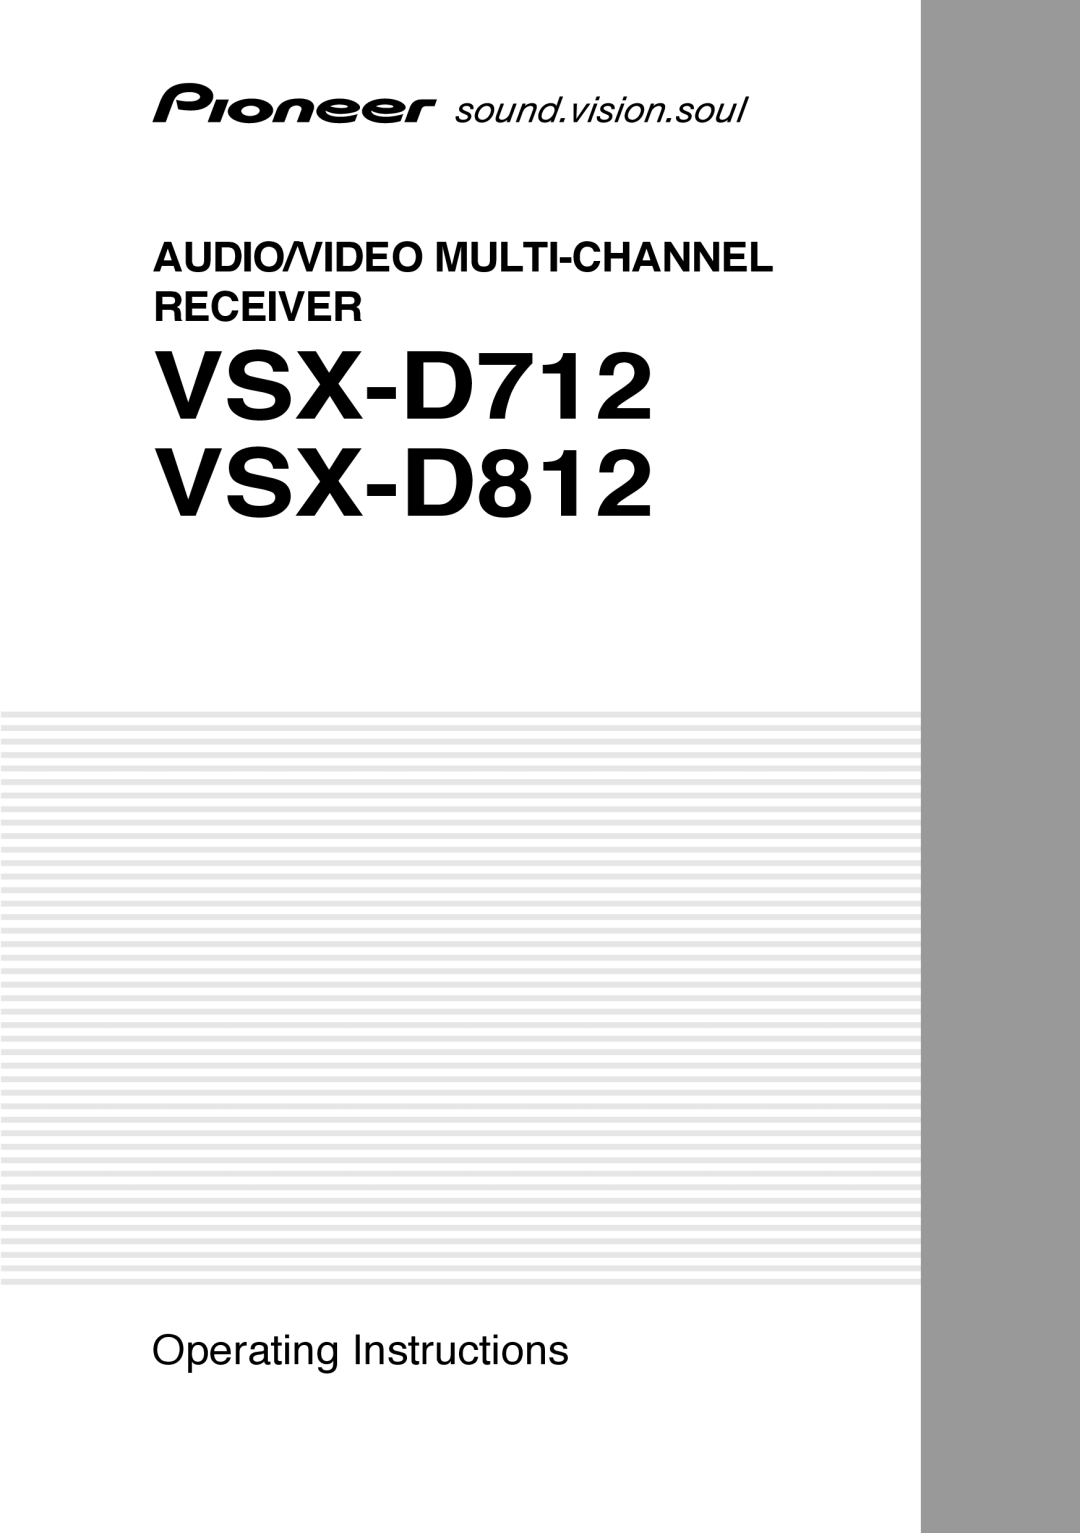 Pioneer manual VSX-D712 VSX-D812, Audio/Video Multi-Channelreceiver, Operating Instructions 